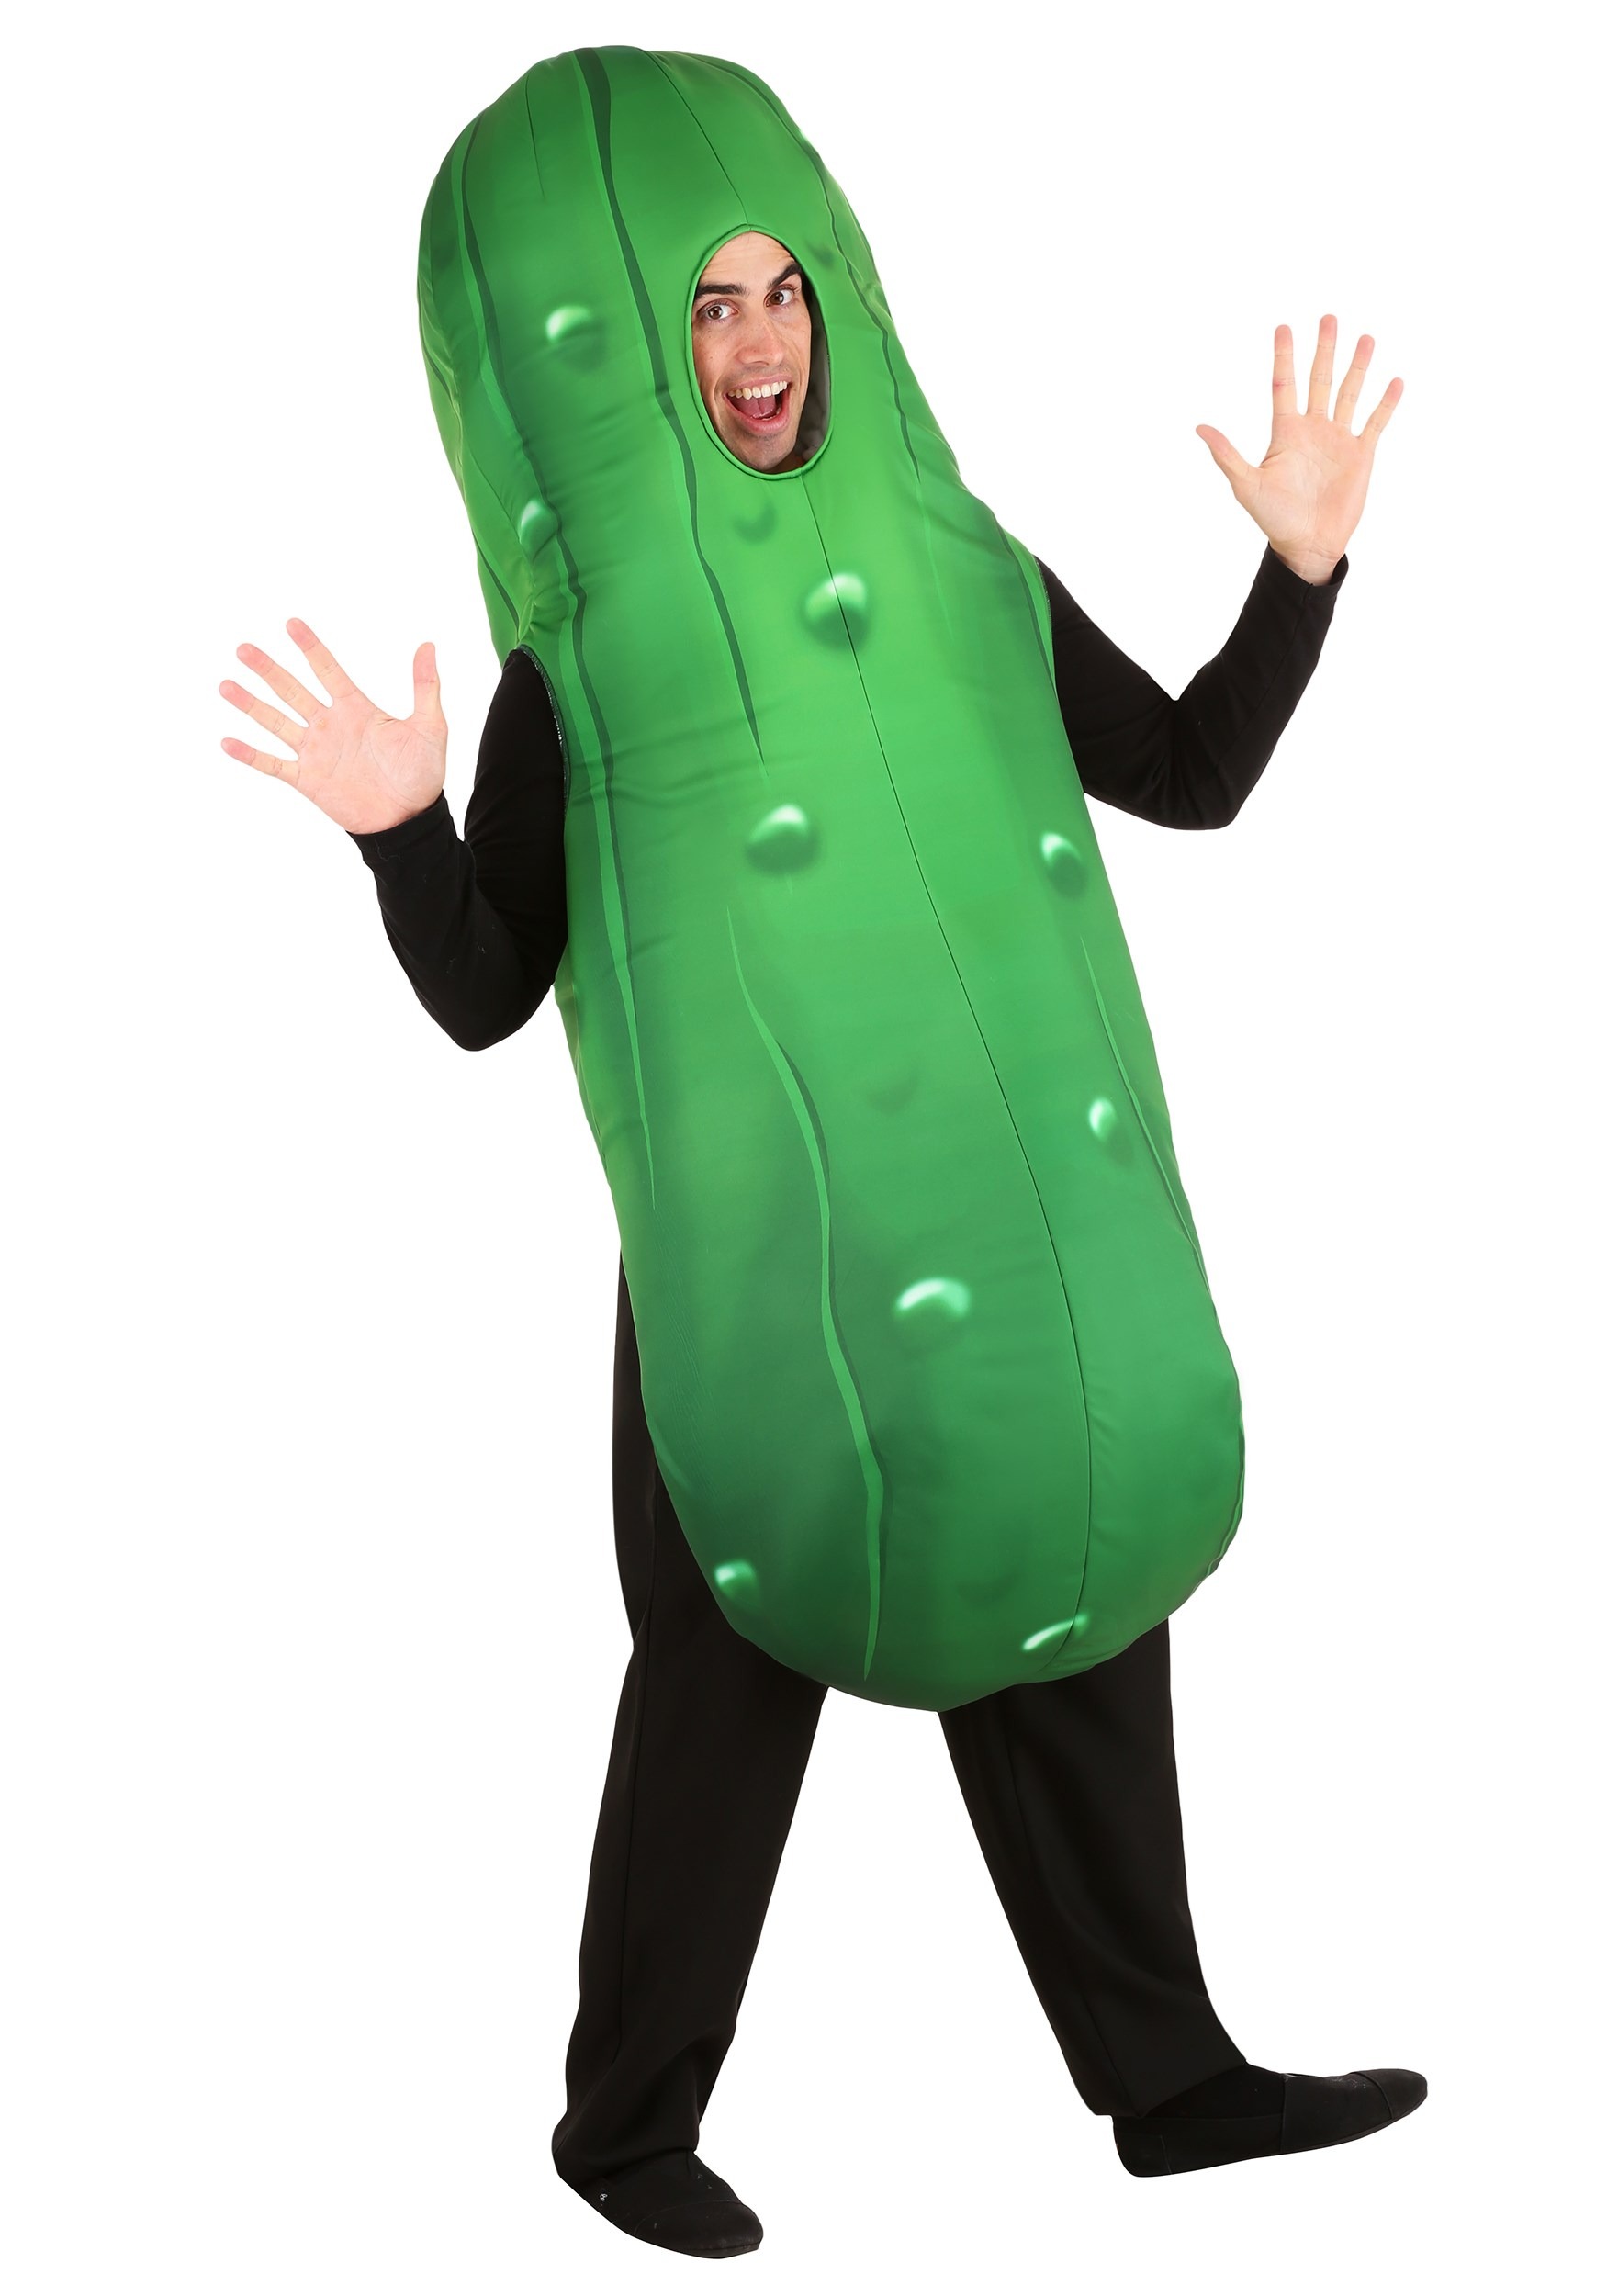 Photos - Fancy Dress FUN Costumes Pickle Adult Costume | Adult Food Halloween Costumes Green